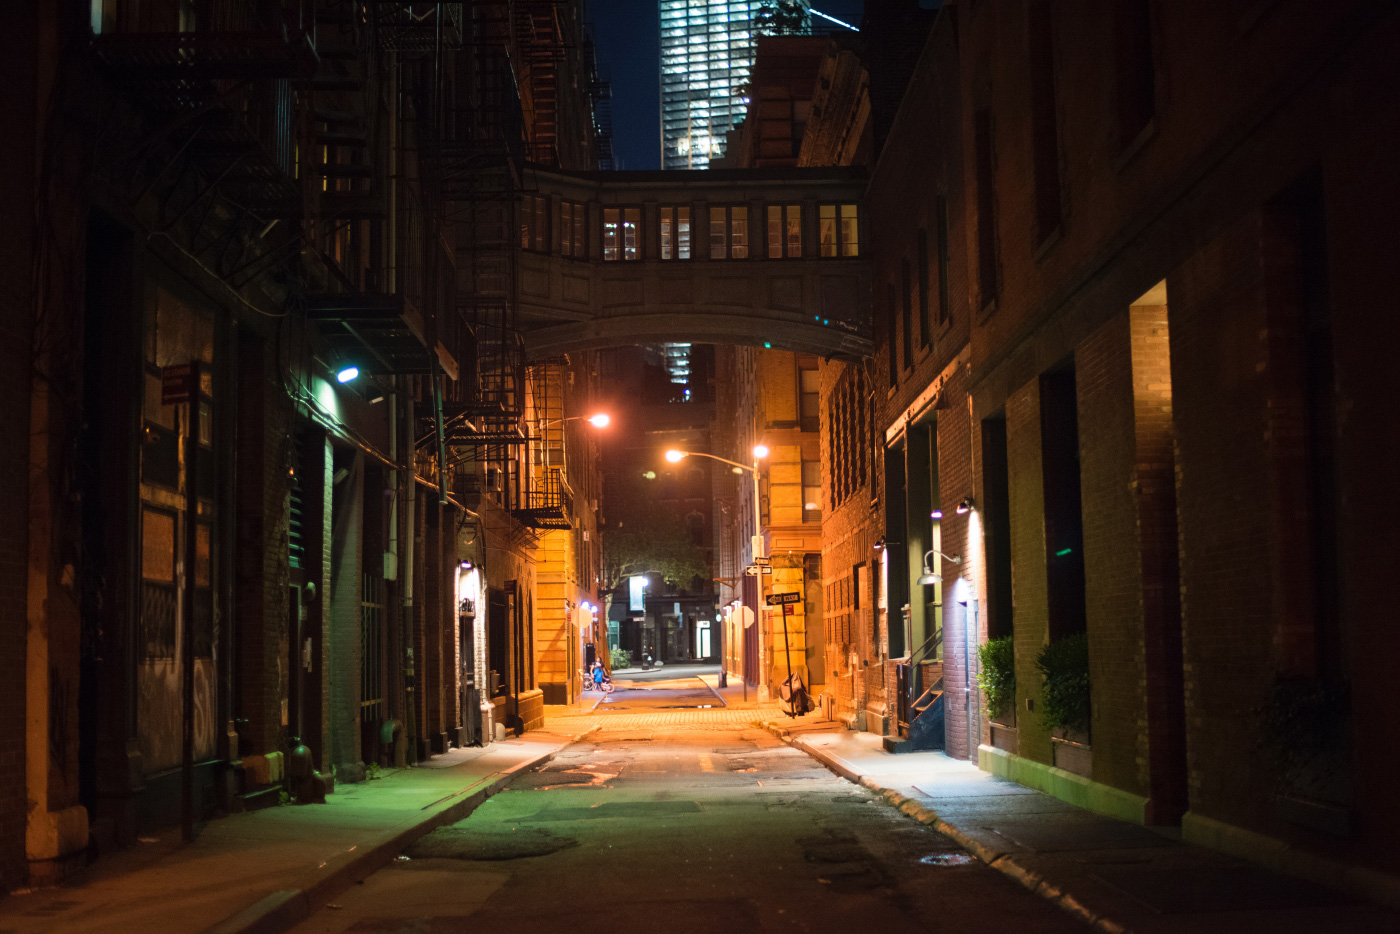 The empty streets of Manhattan at night,. The DDC has put a pause on public design work